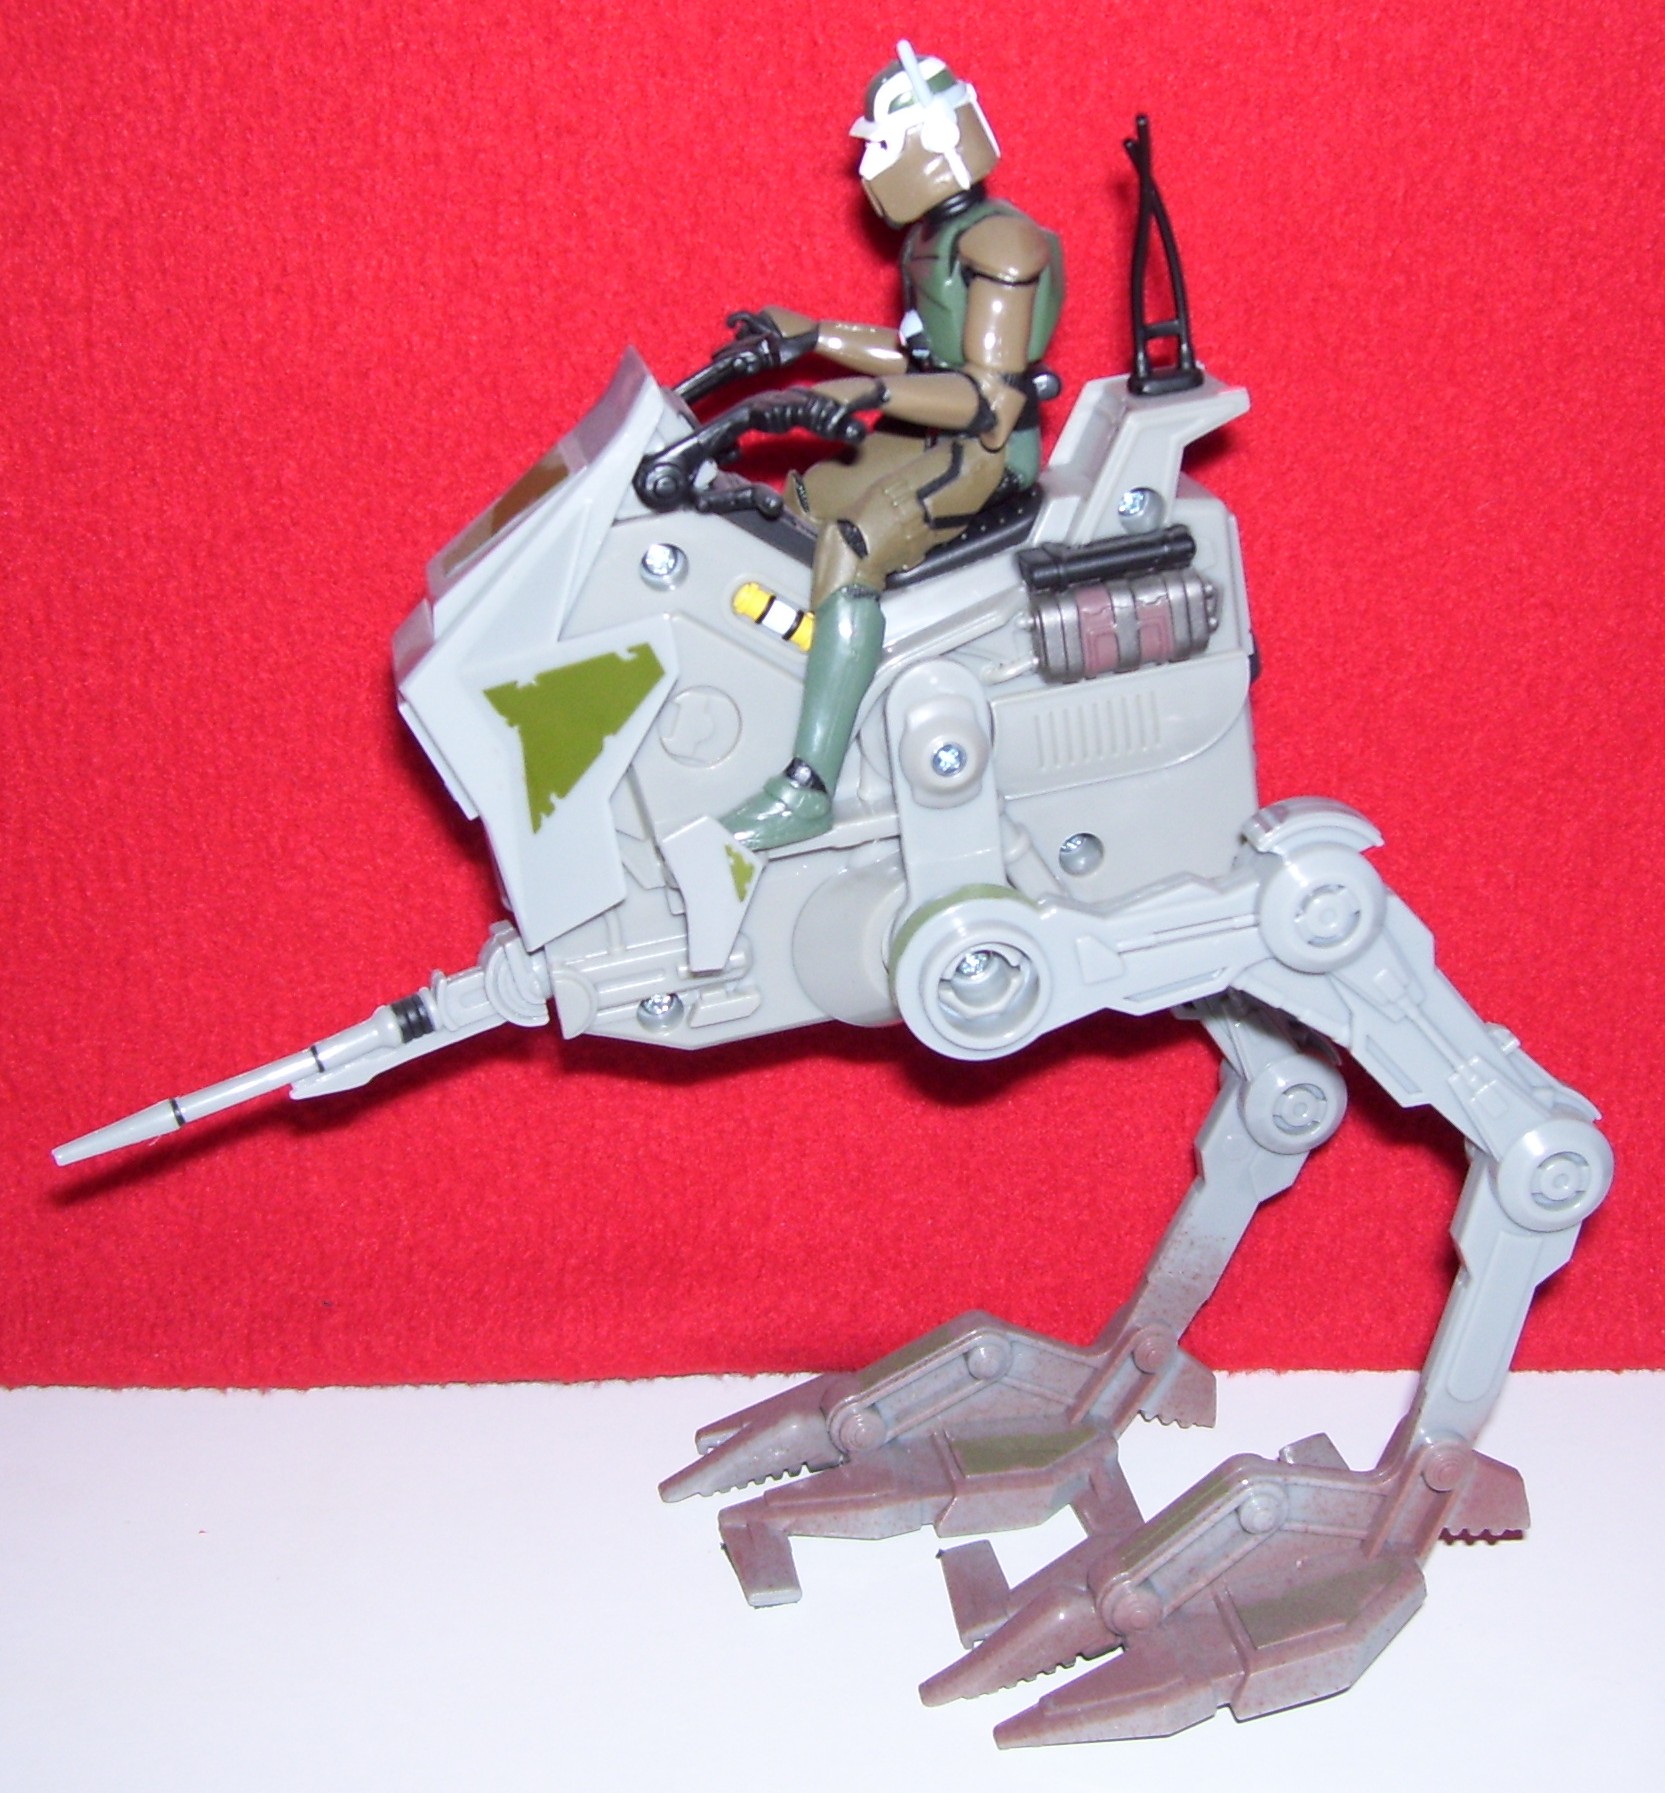 hasbro has released an at-rt walker